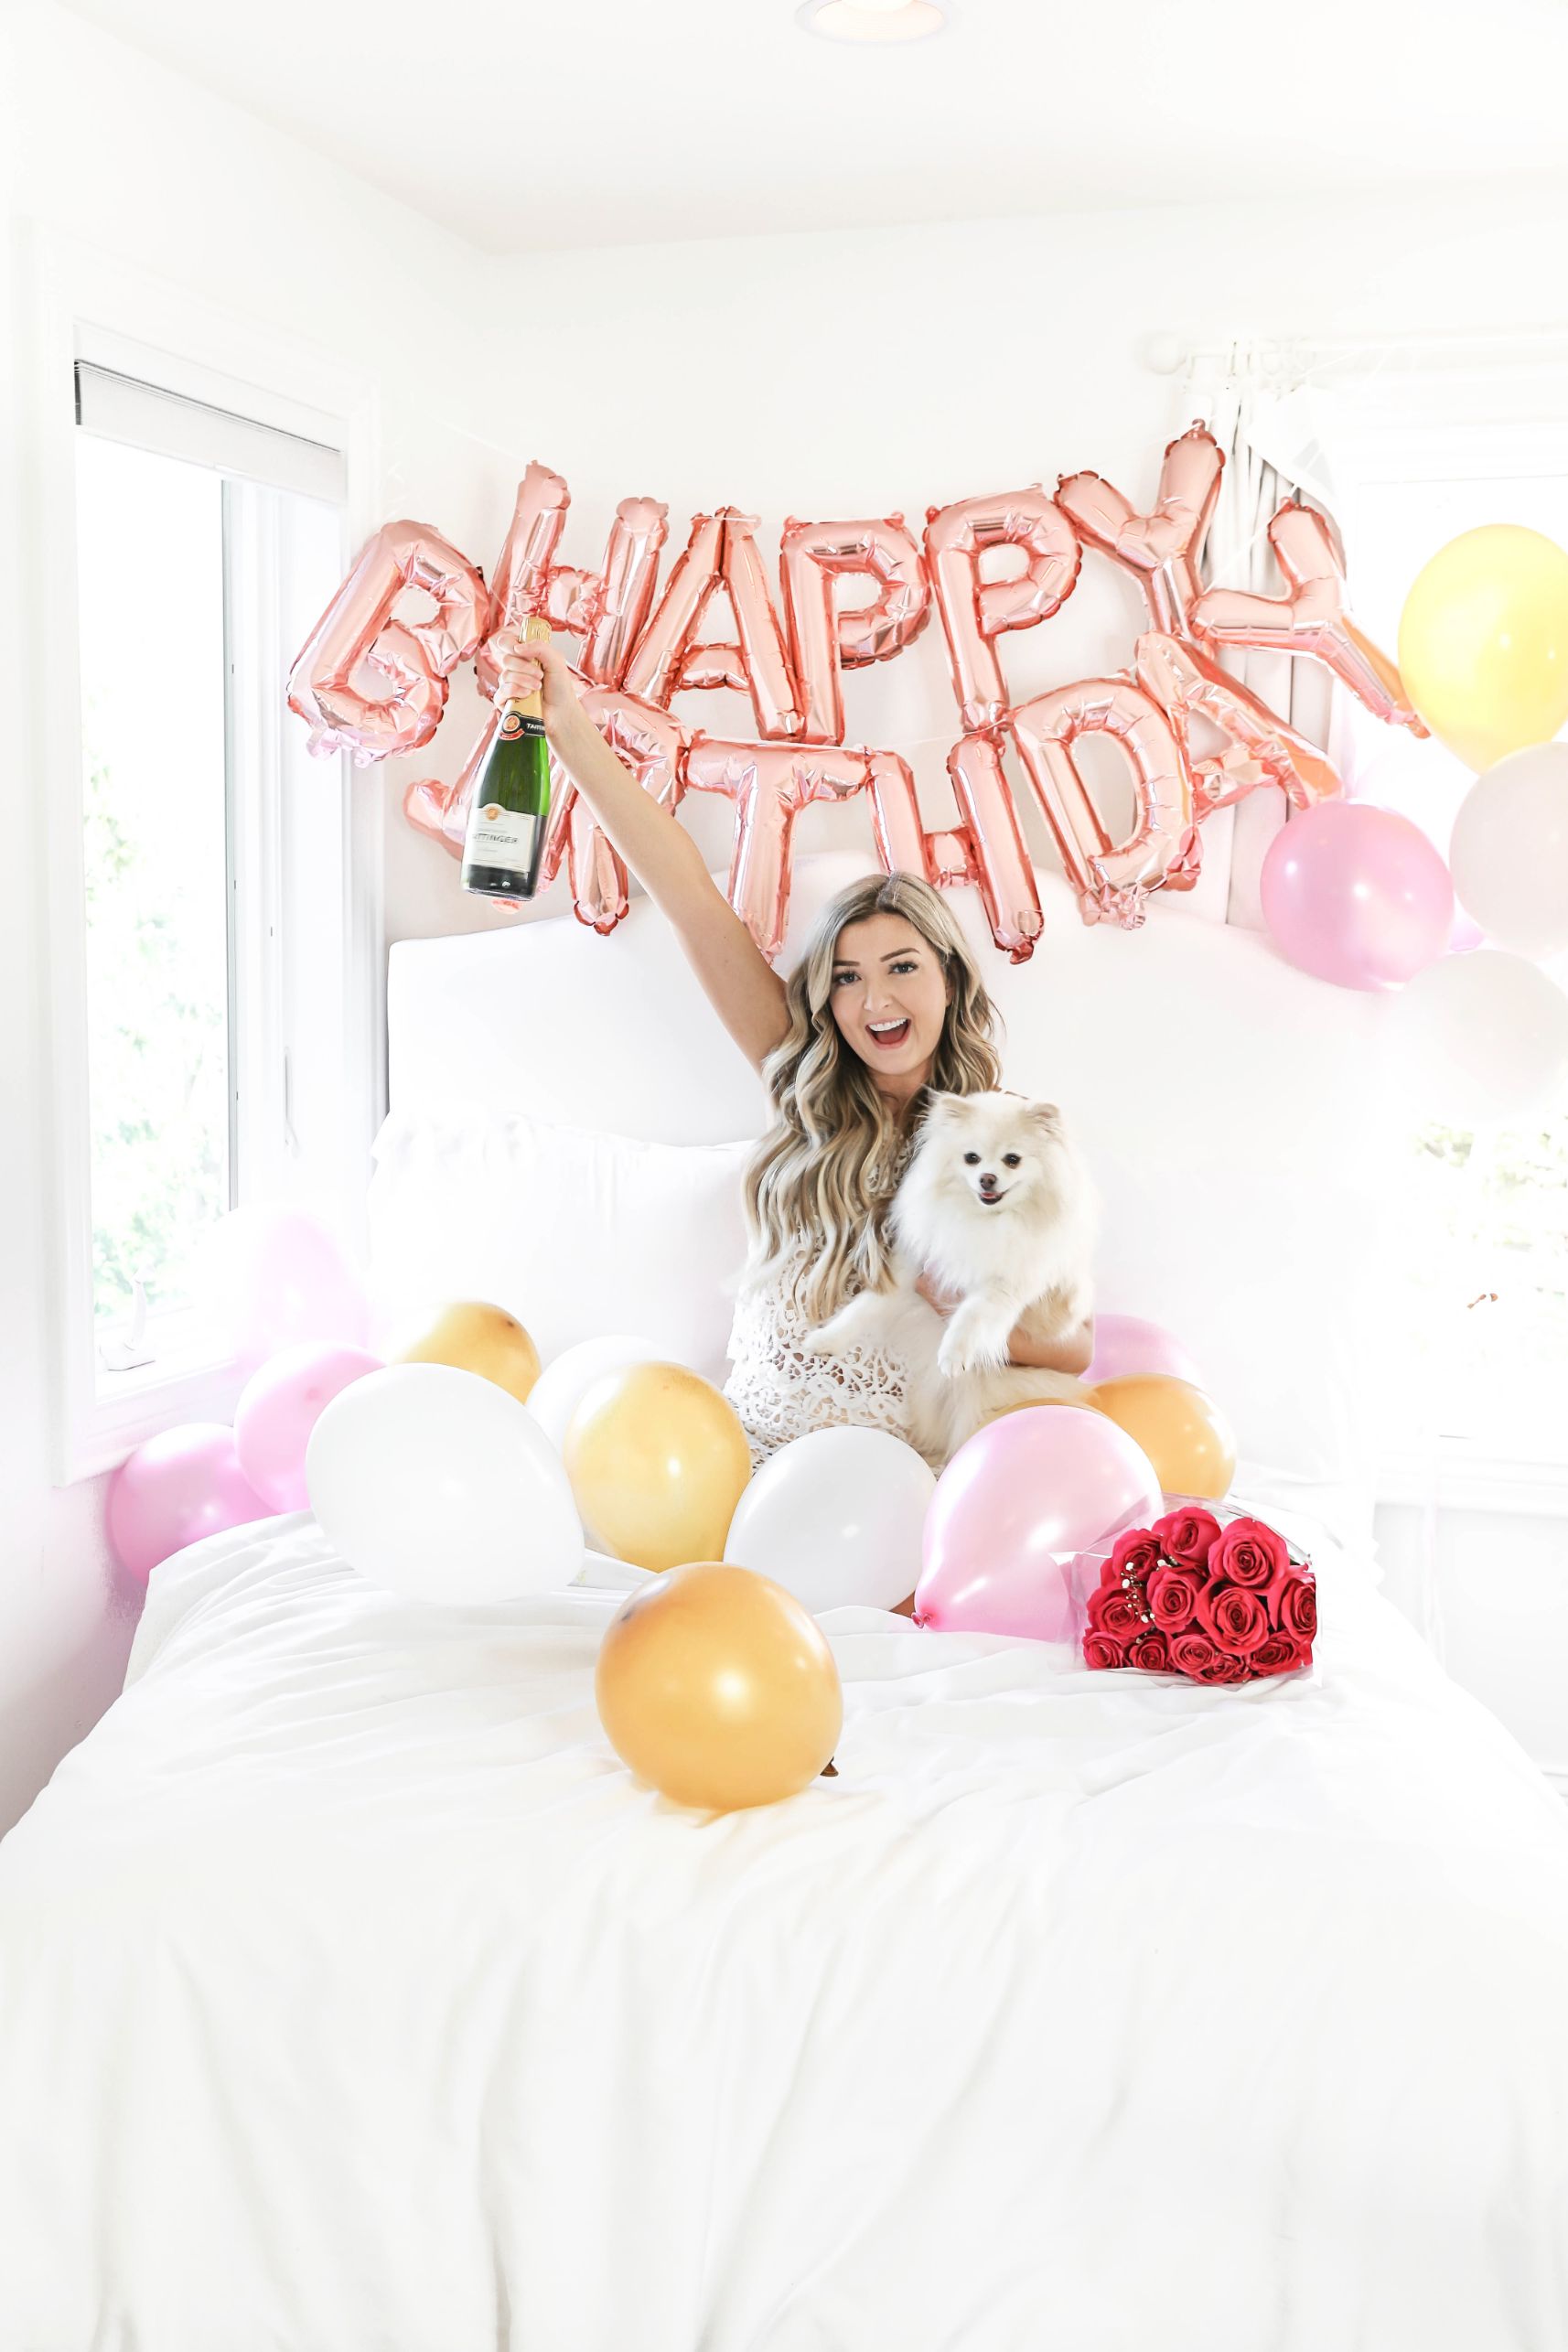 Happy birthday balloons photoshoot in bed with happy birthday blow ups and champagne! Details on fashion blog daily dose of charm by lauren lindmark